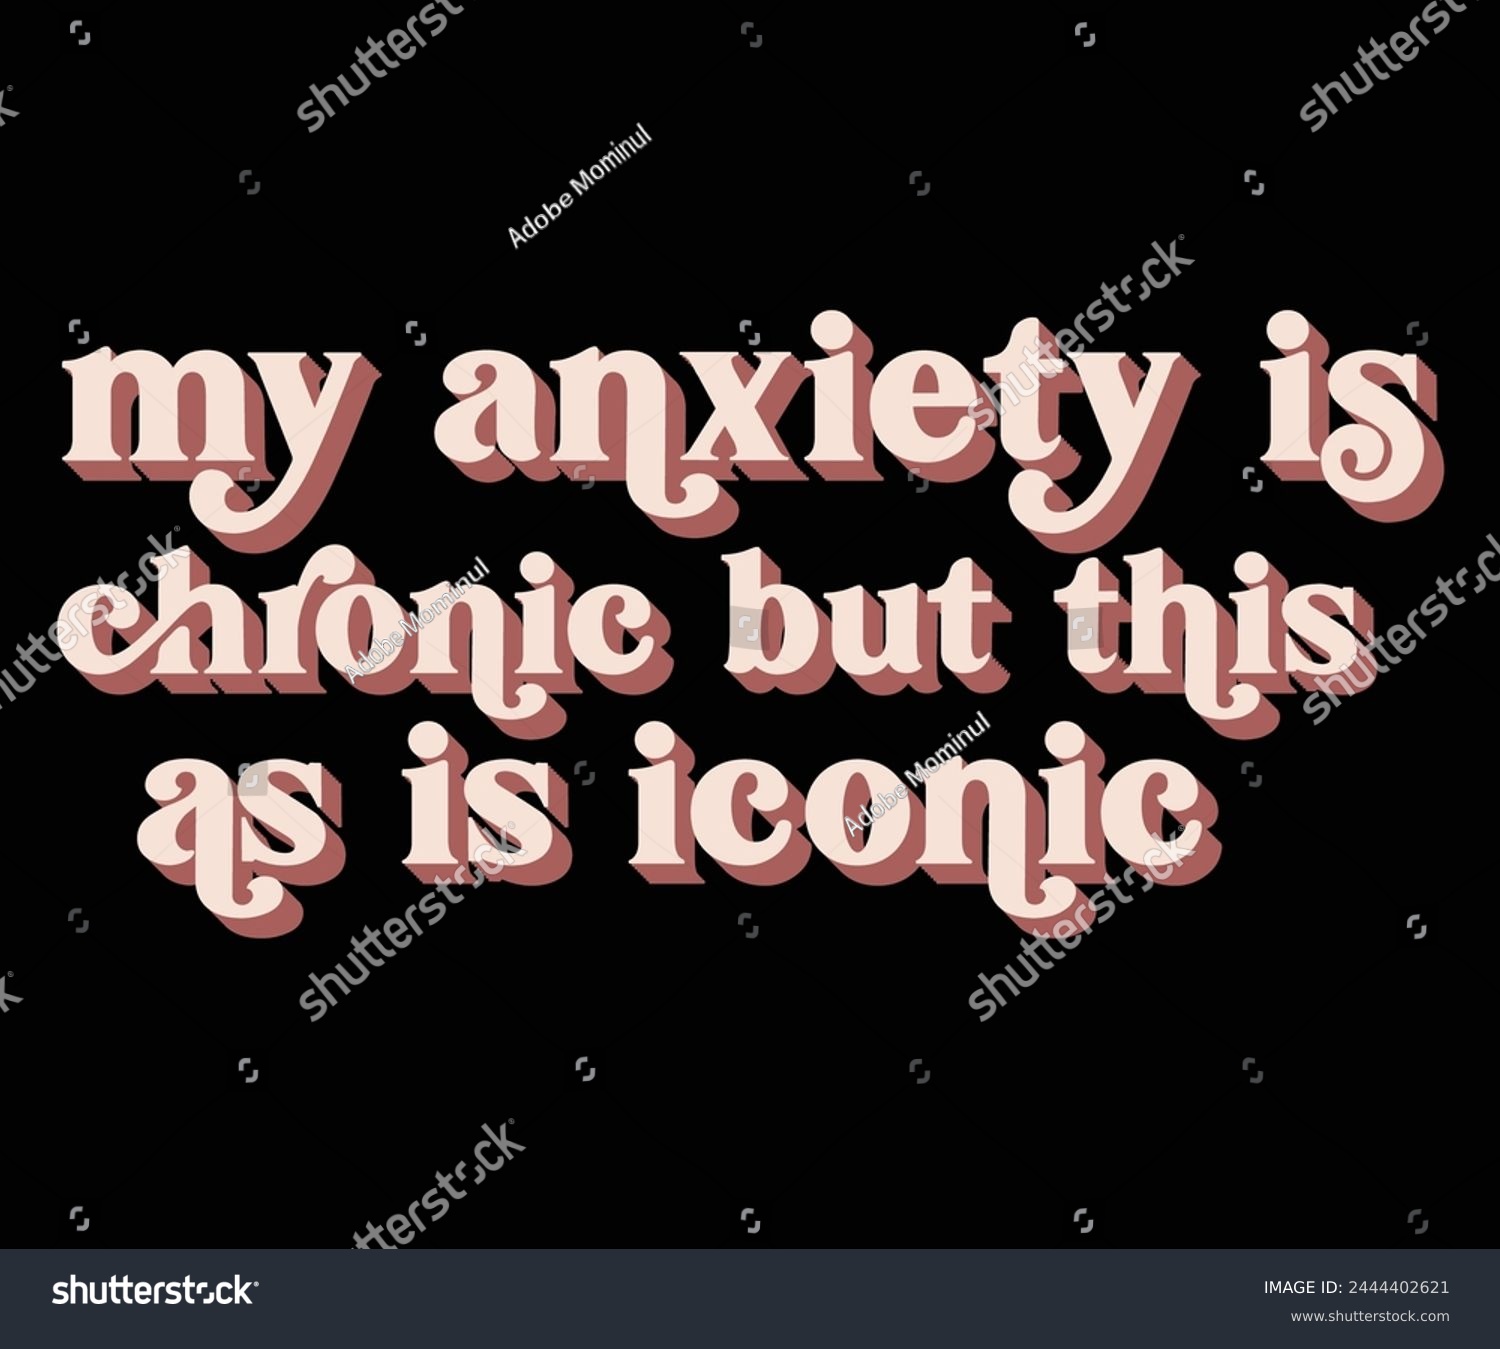 SVG of My Anxiety Is Chronic But This As Is Iconic Svg,Mental Health Svg,Mental Health Awareness Svg,Anxiety Svg,Depression Svg,Funny Mental Health,Motivational Svg,Positive Svg,Cut File,Commercial Use svg